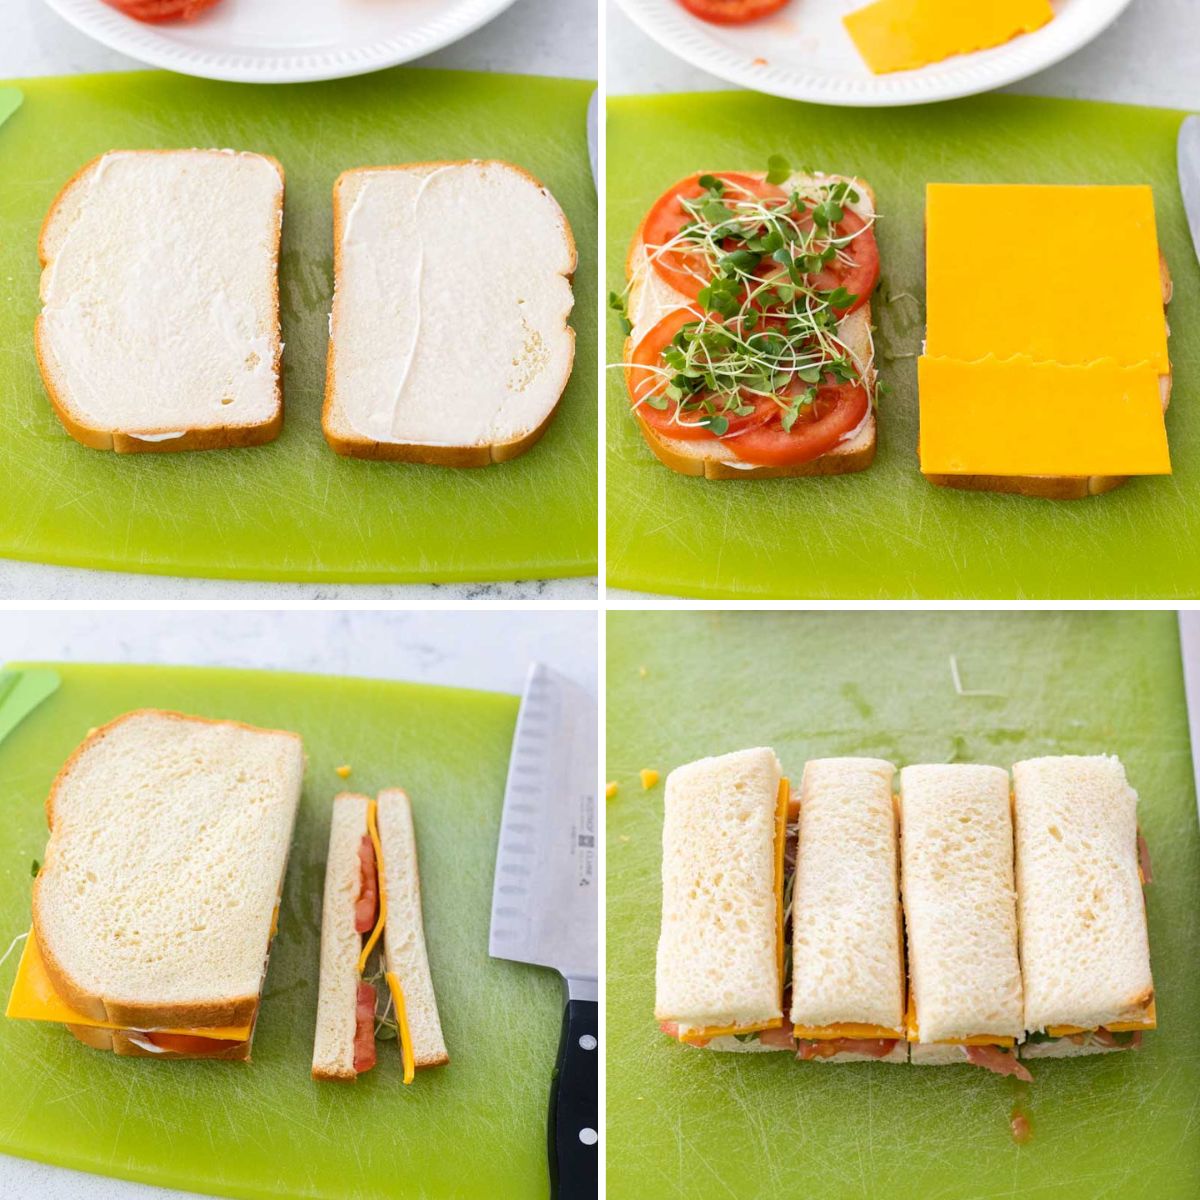 Step by step photos show how to assemble a finger sandwich.